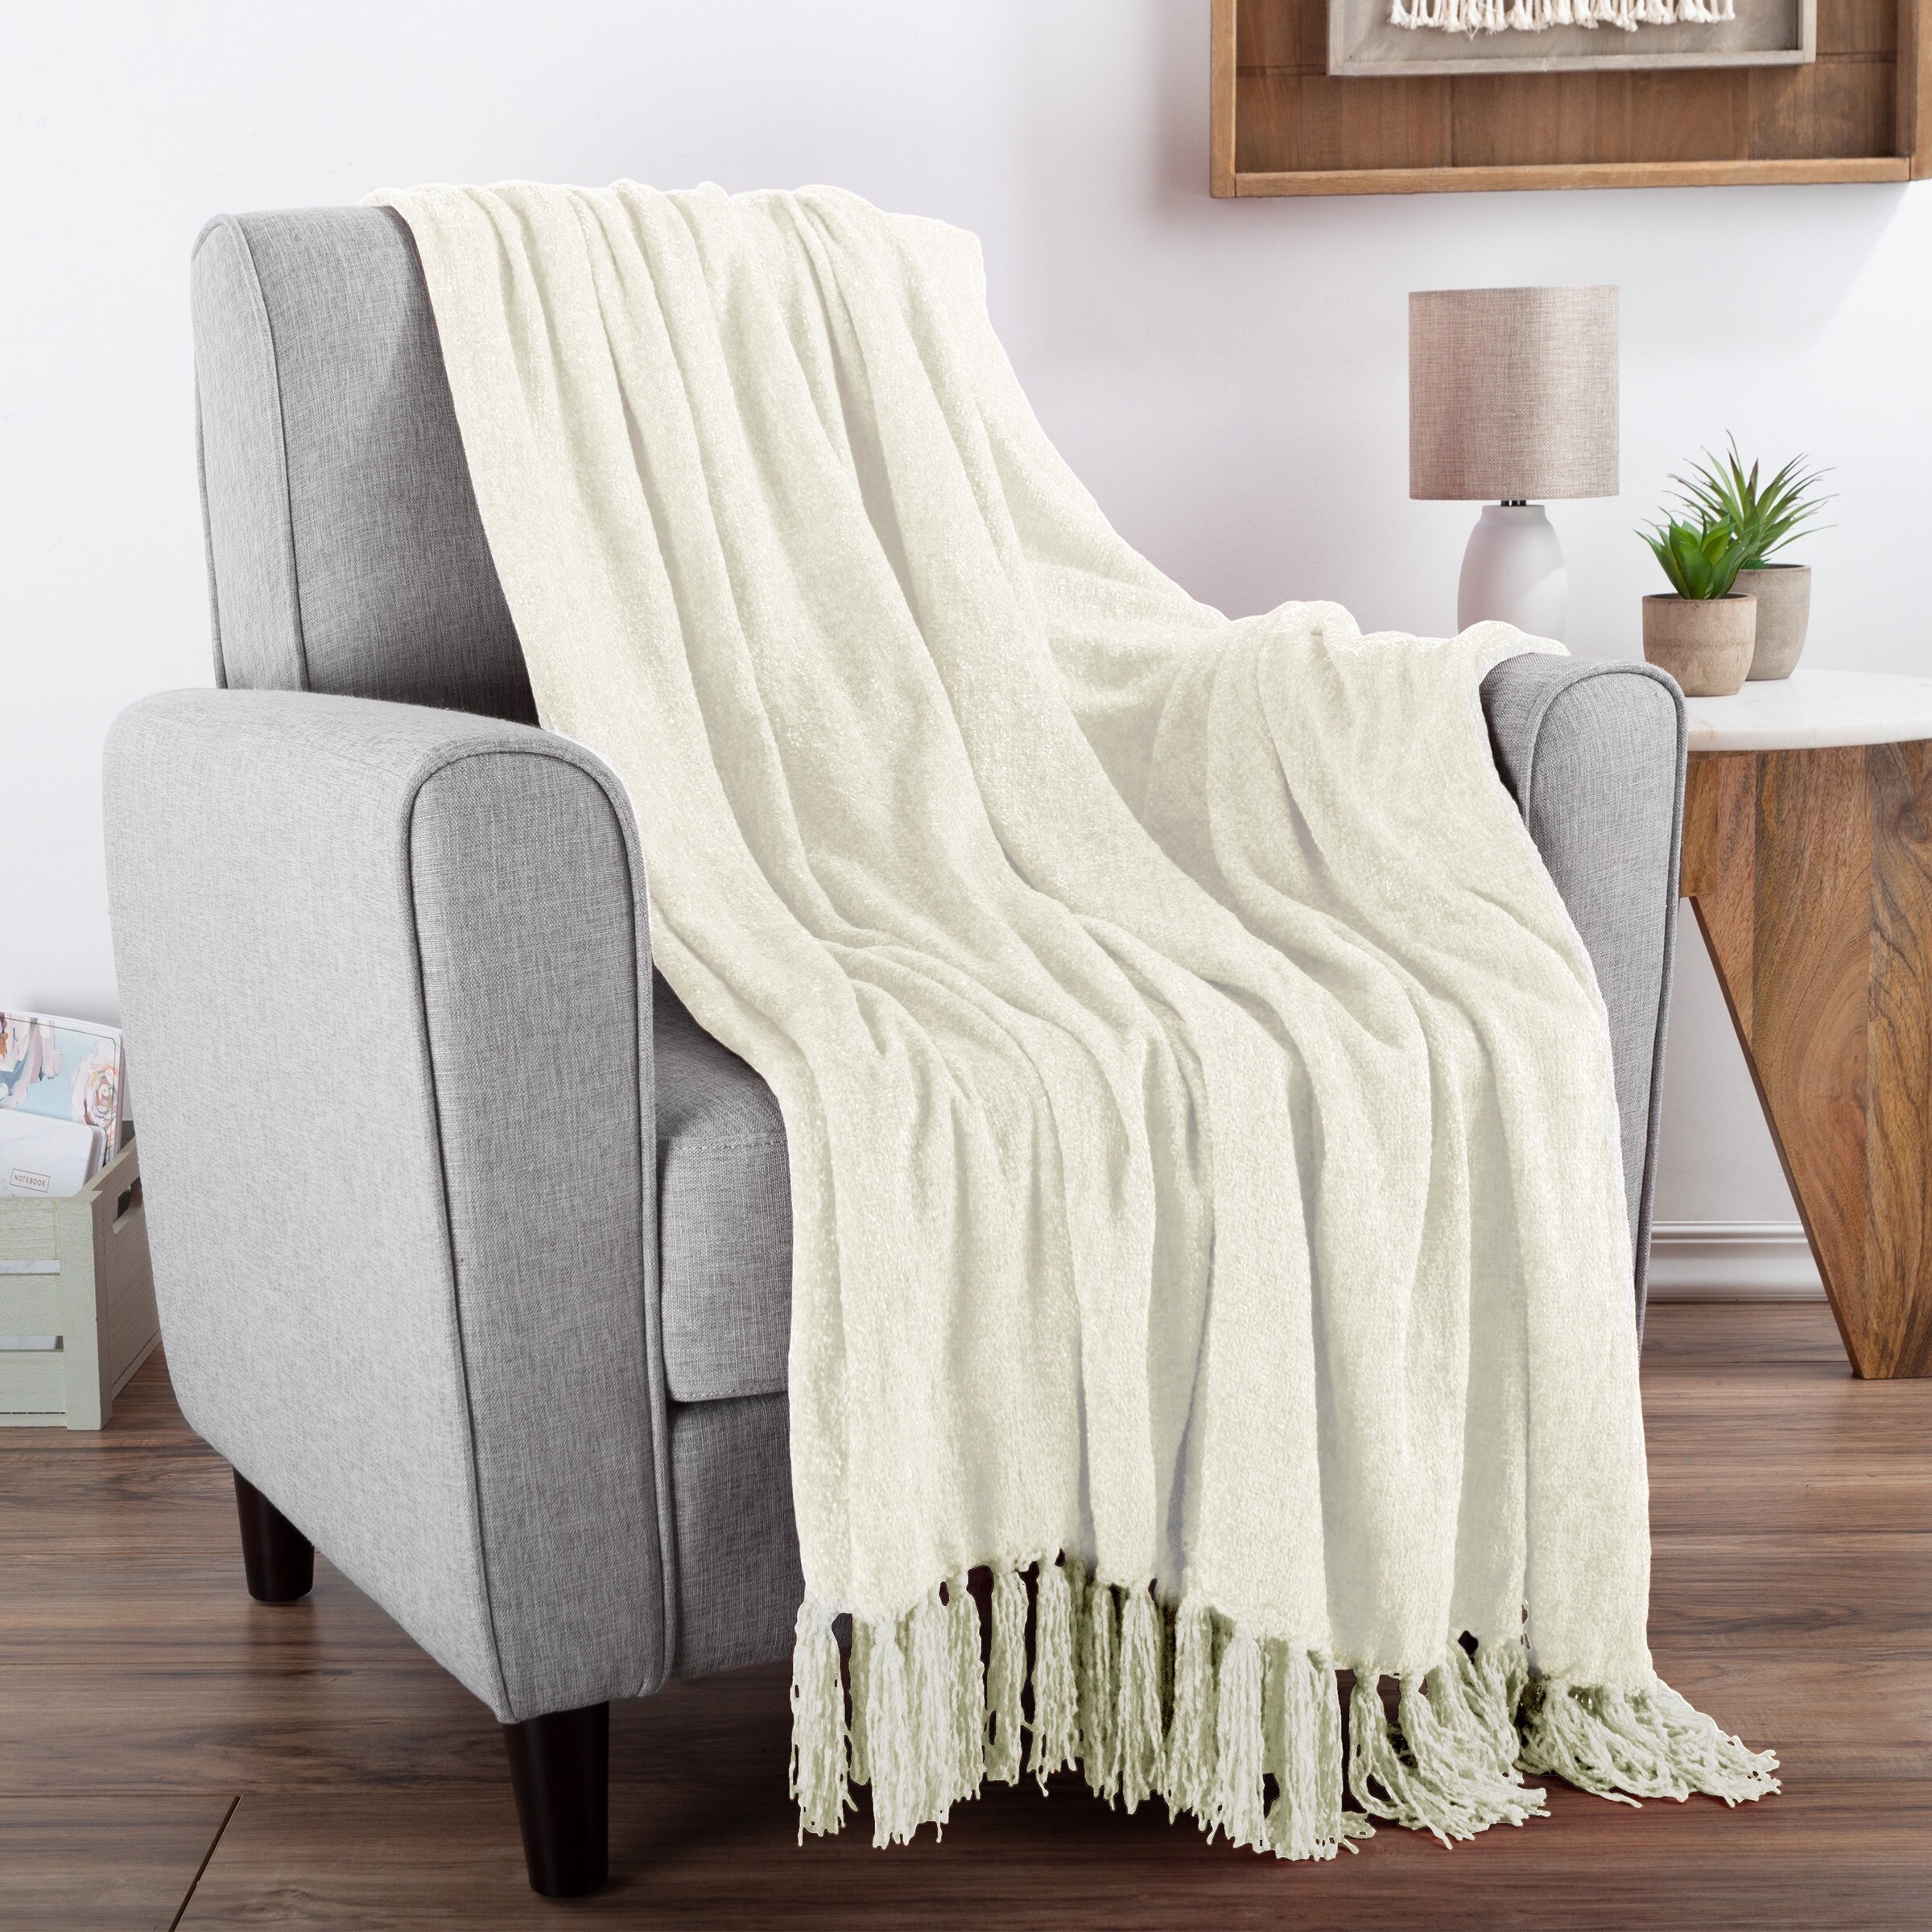 https://ak1.ostkcdn.com/images/products/is/images/direct/9b48e9b18f9bb7a51f85582e55d7ad85df5960fc/Oversized-Chenille-Throw-Blanket-by-LHC.jpg